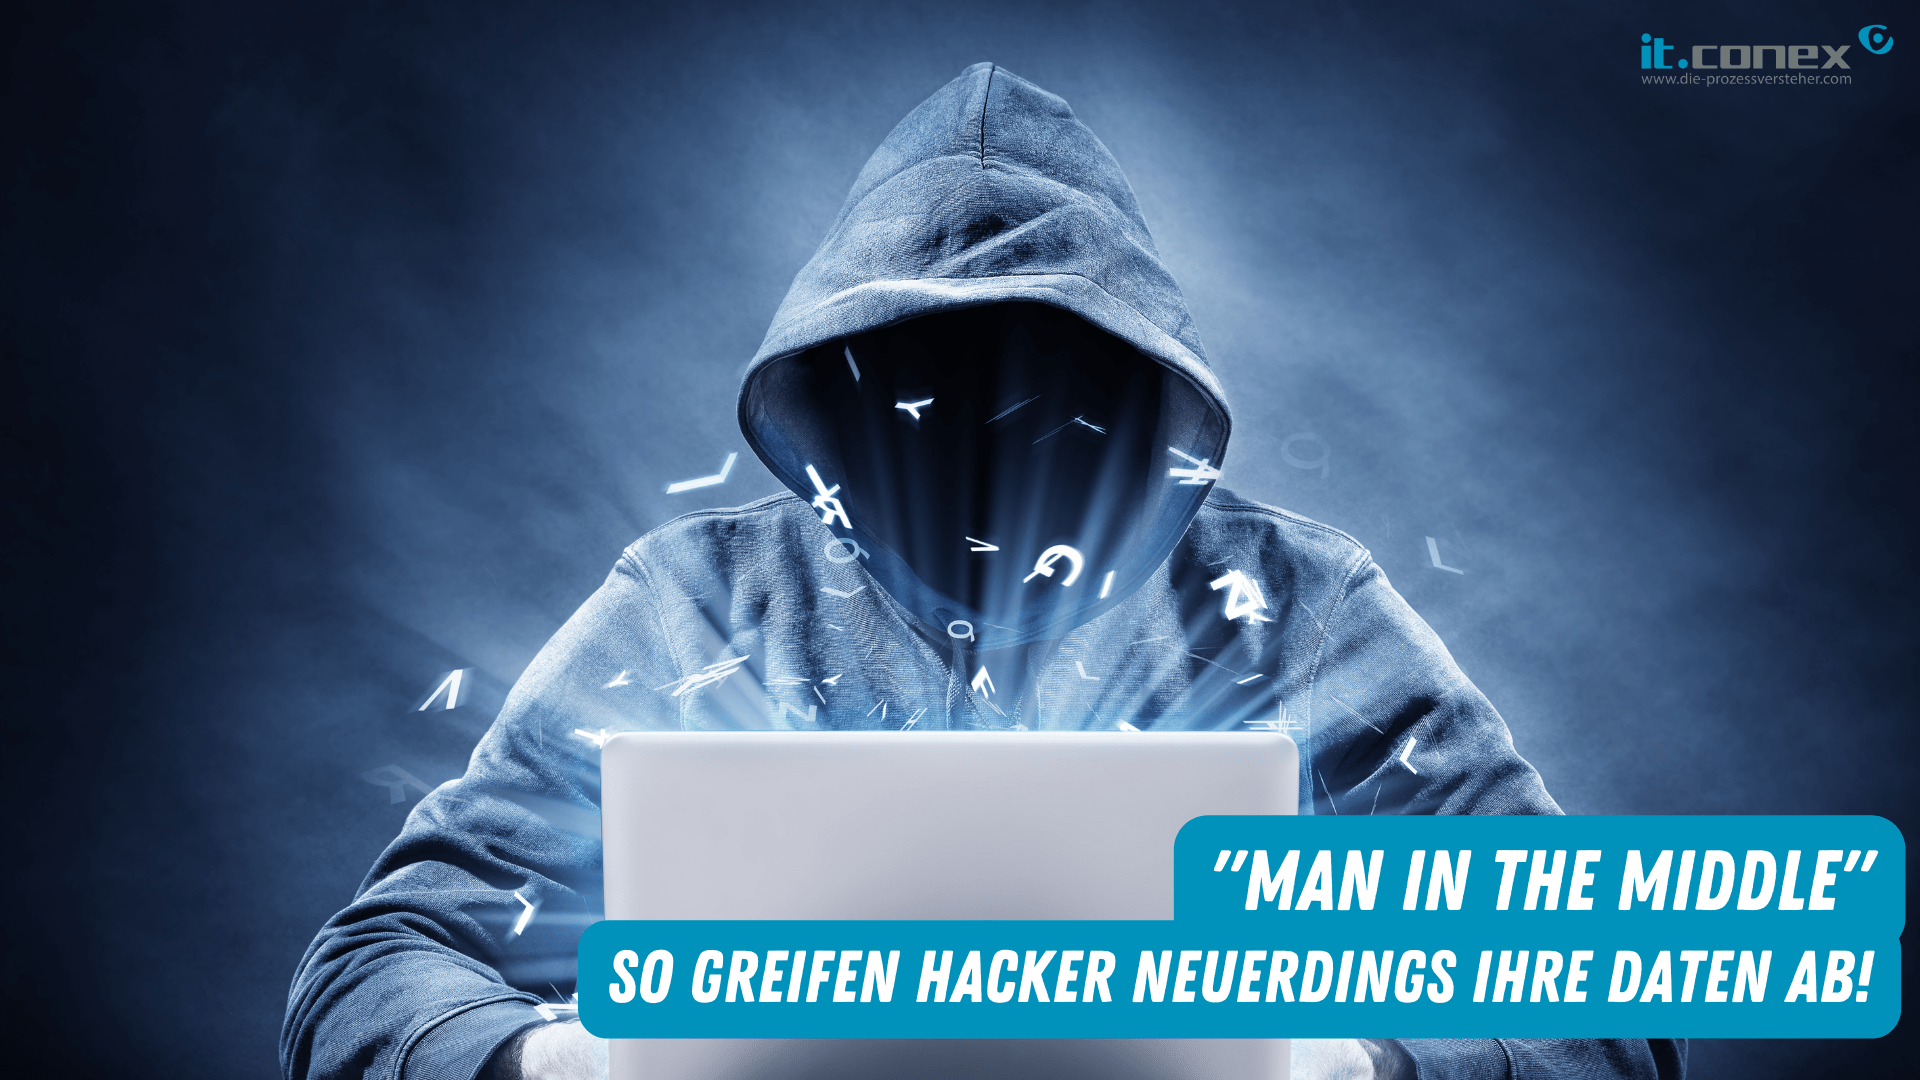 „Man in the middle“ – Next Level Hacking